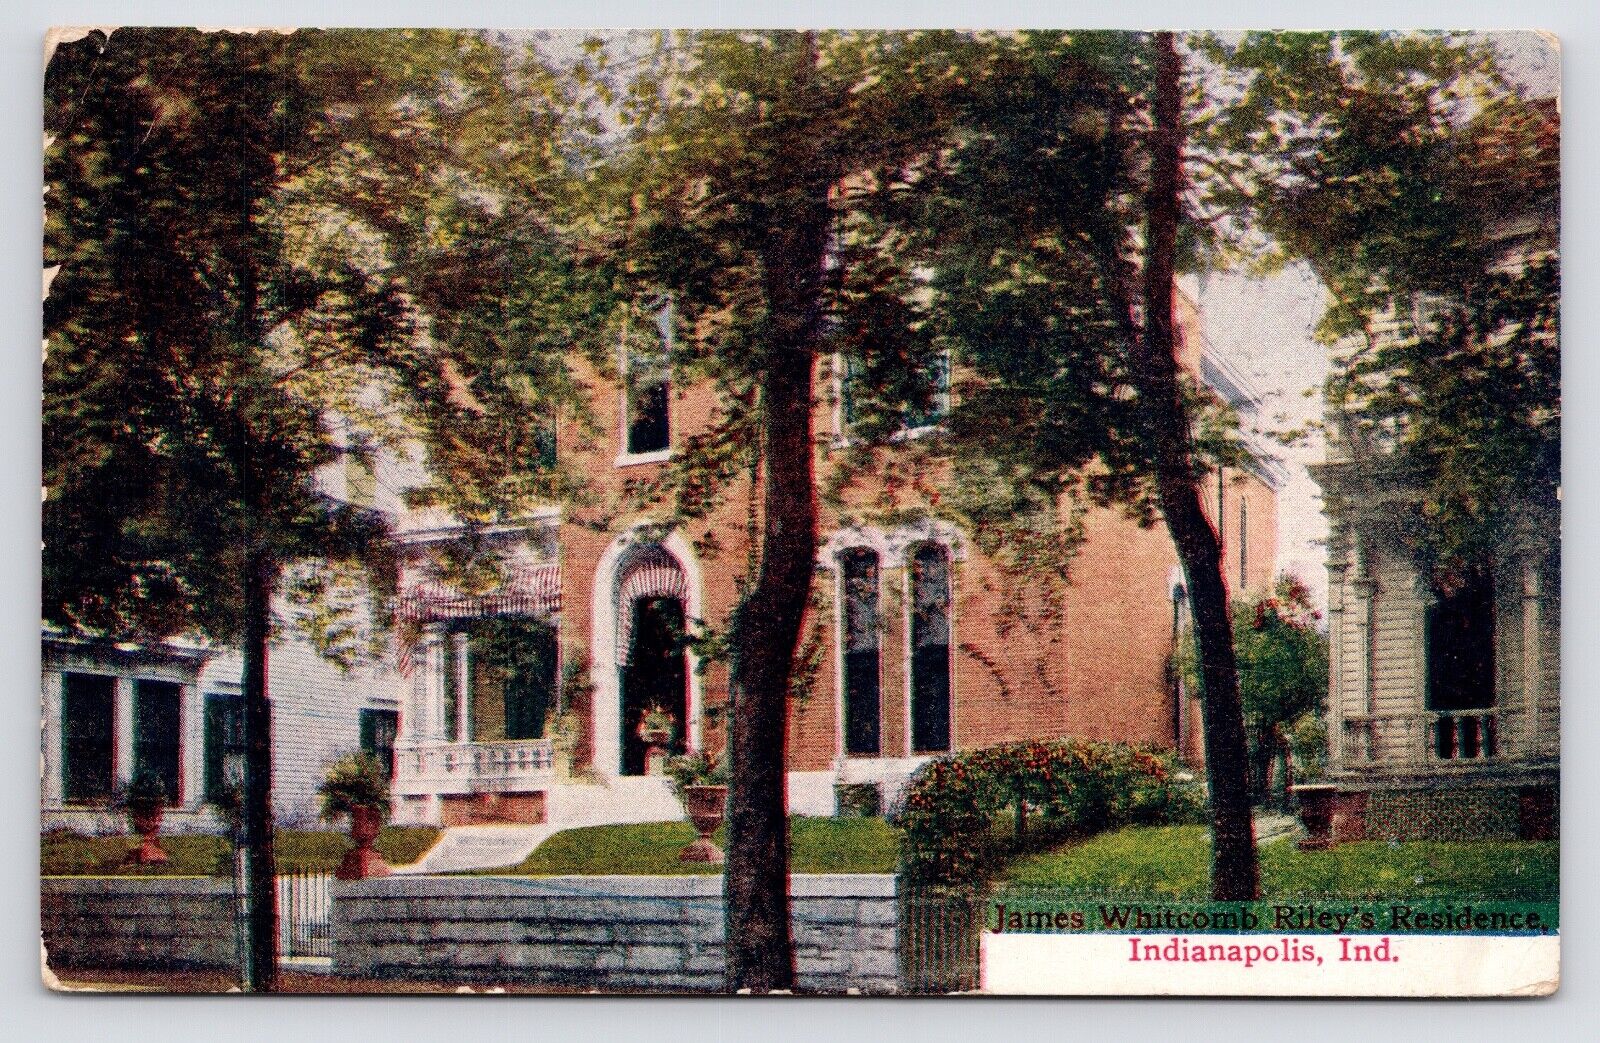 c1910 James Whitcomb Riley Residence House Indianapolis Indiana IN Postcard